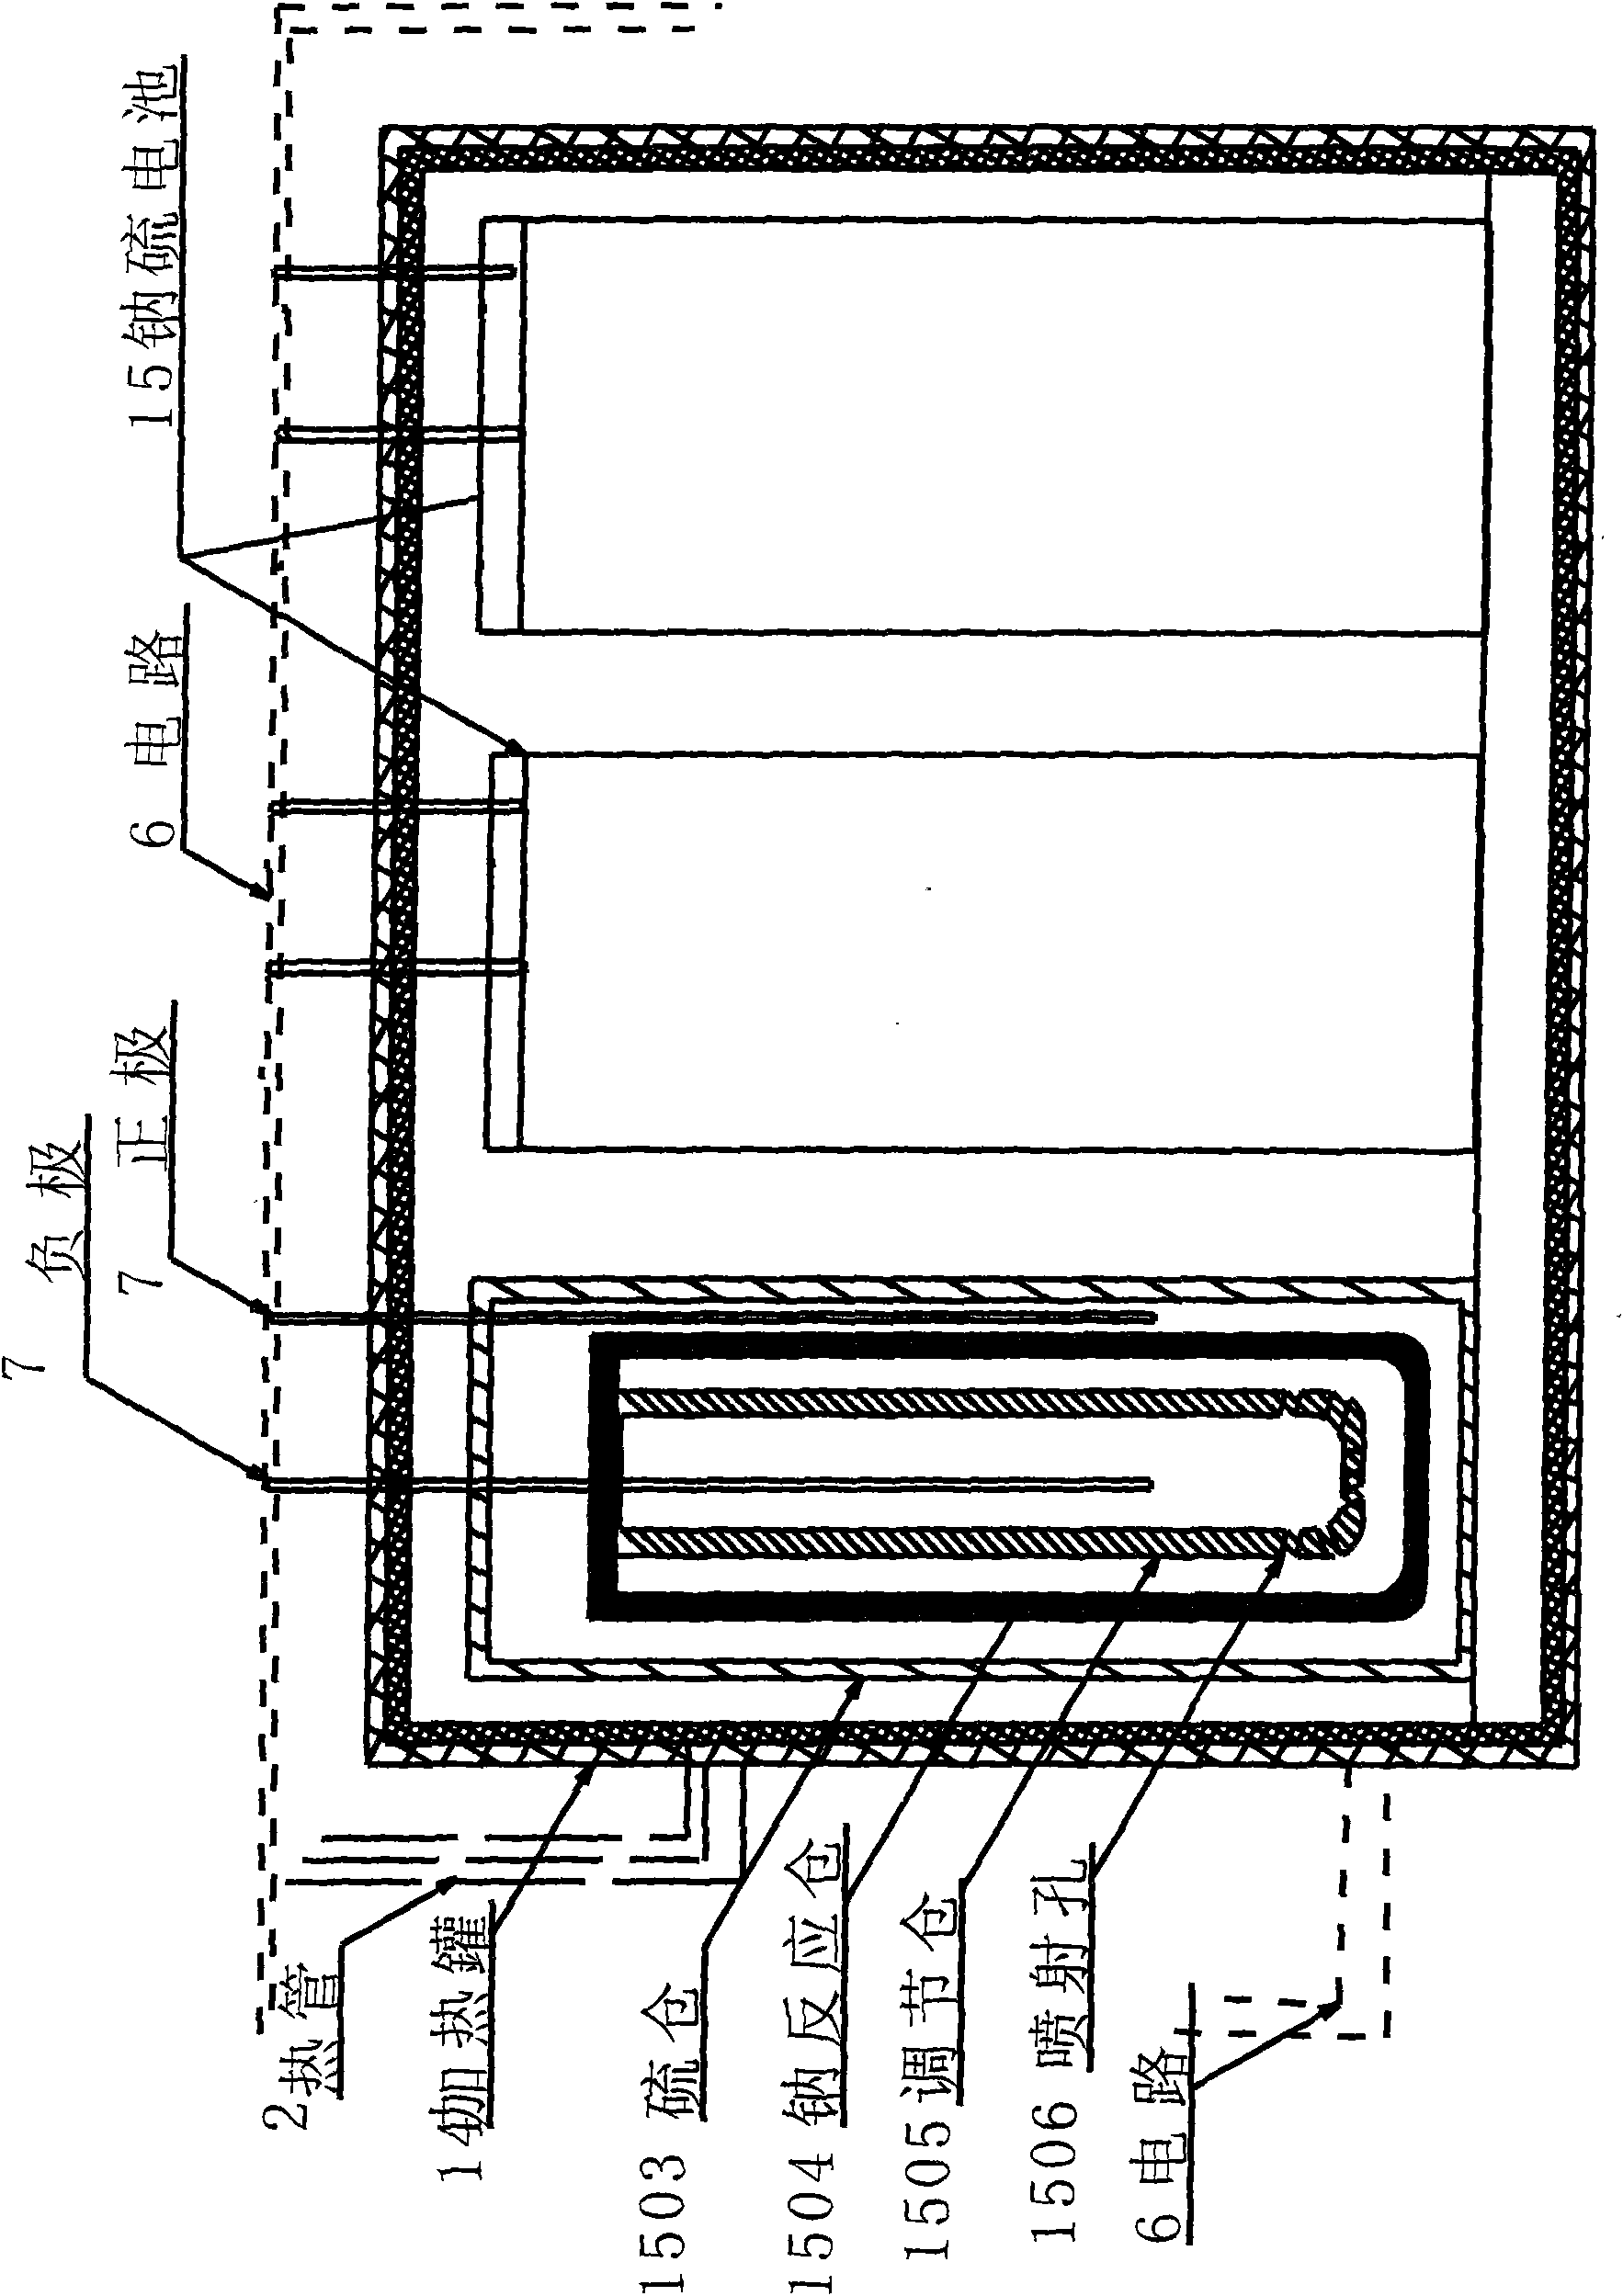 Solar energy storing and electricity generating sodium-sulfur cell